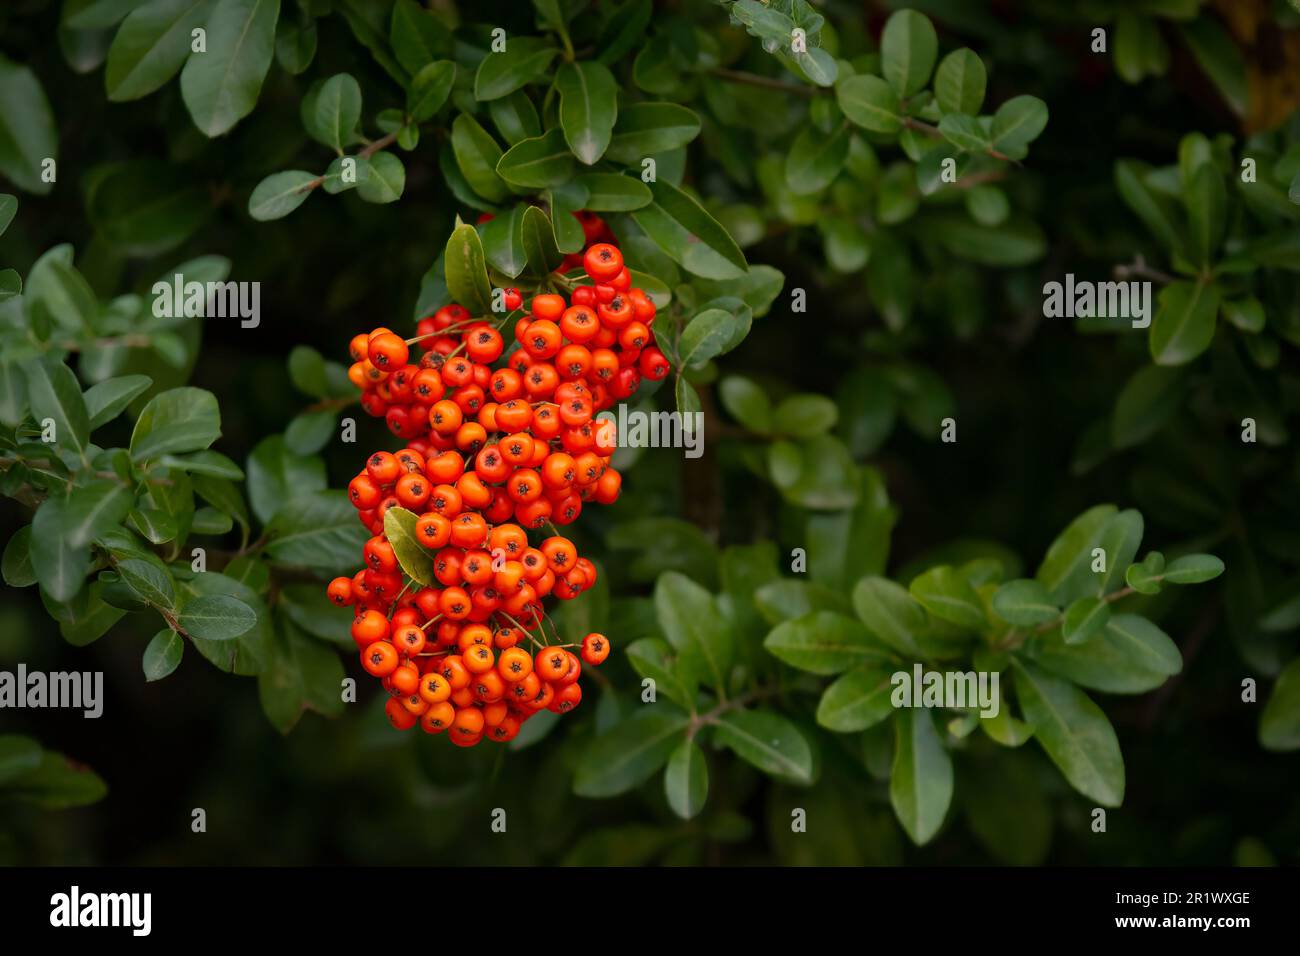 The orange red autumn berries of the Cotoneaster franchetii, a shrub native to southwestern China, but popularly grown elsewhere as ornamental hedges. Stock Photo